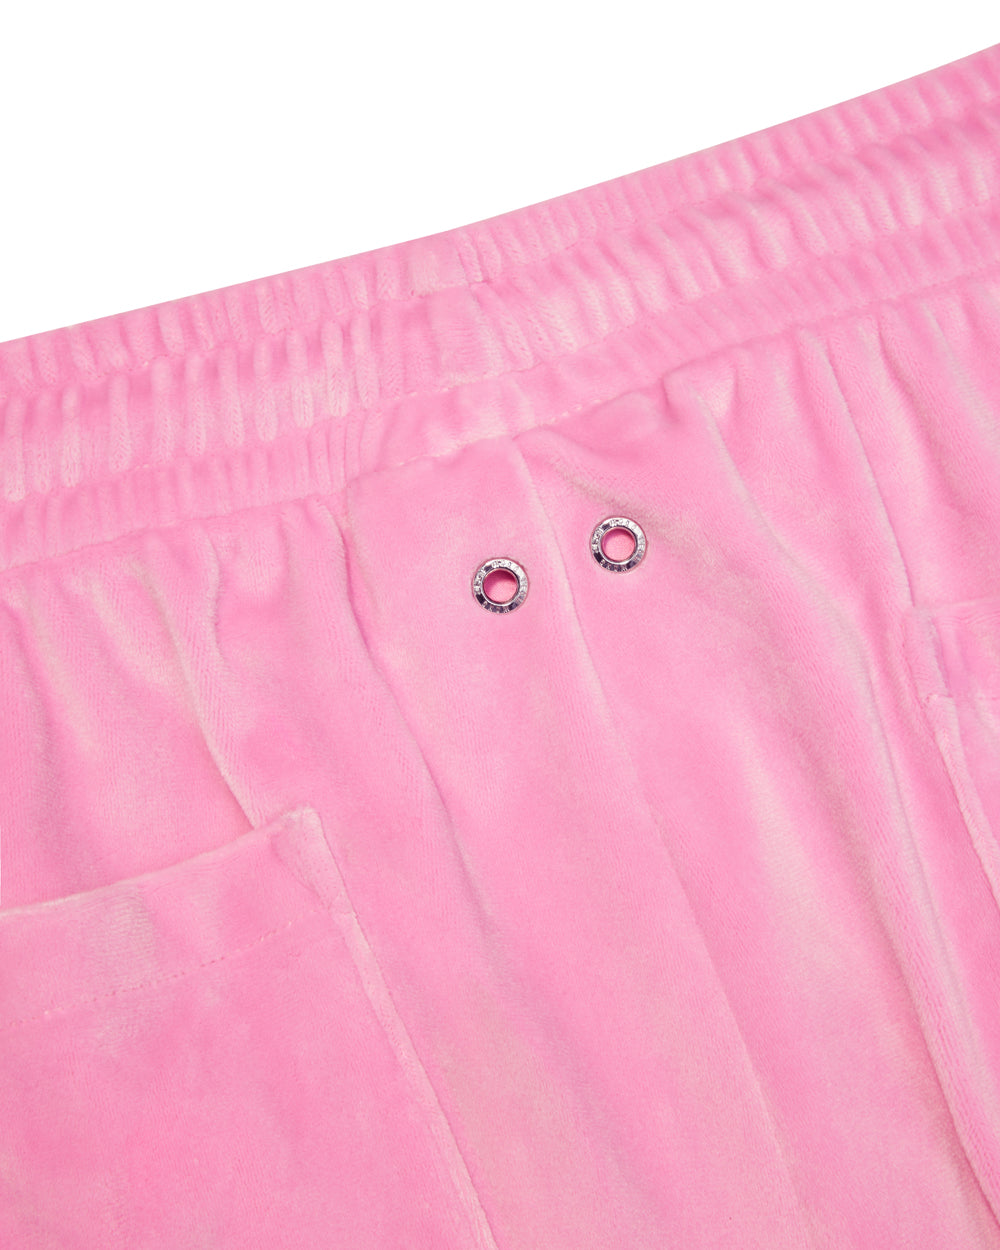 STAY FOR THE NIGHT STRAIGHT PANTS (PINK)